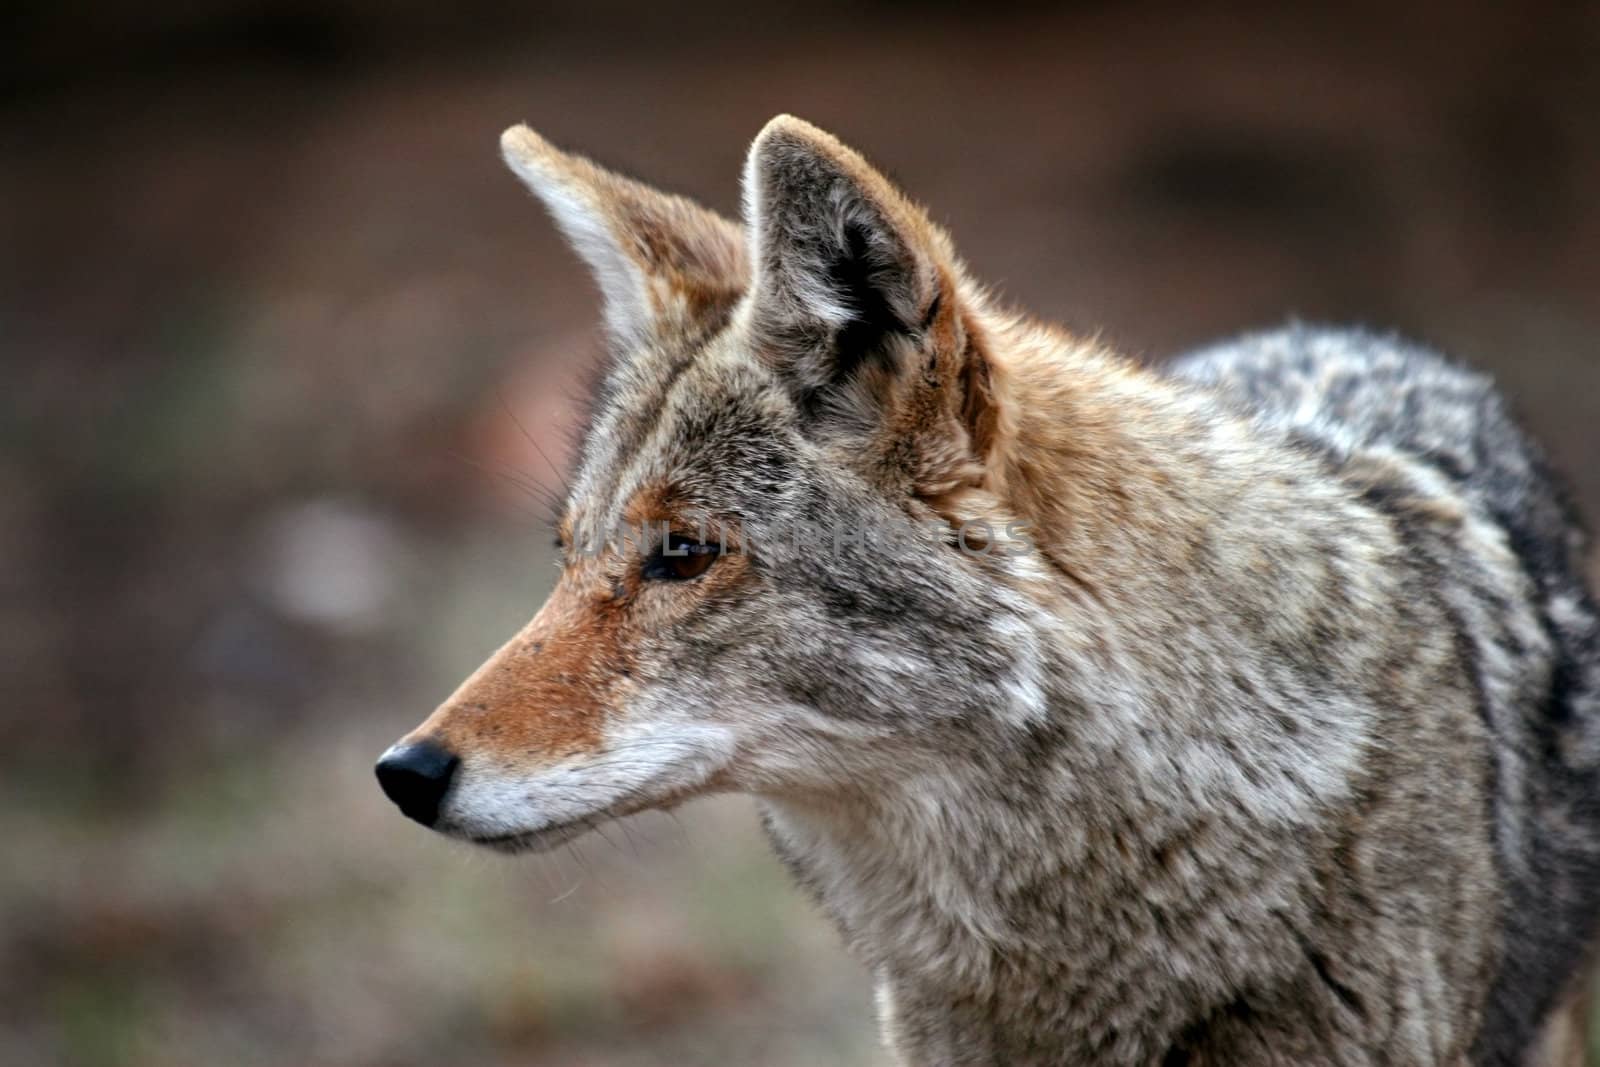 Coyote (Canis latrans) in the wildand showing little fear of humans